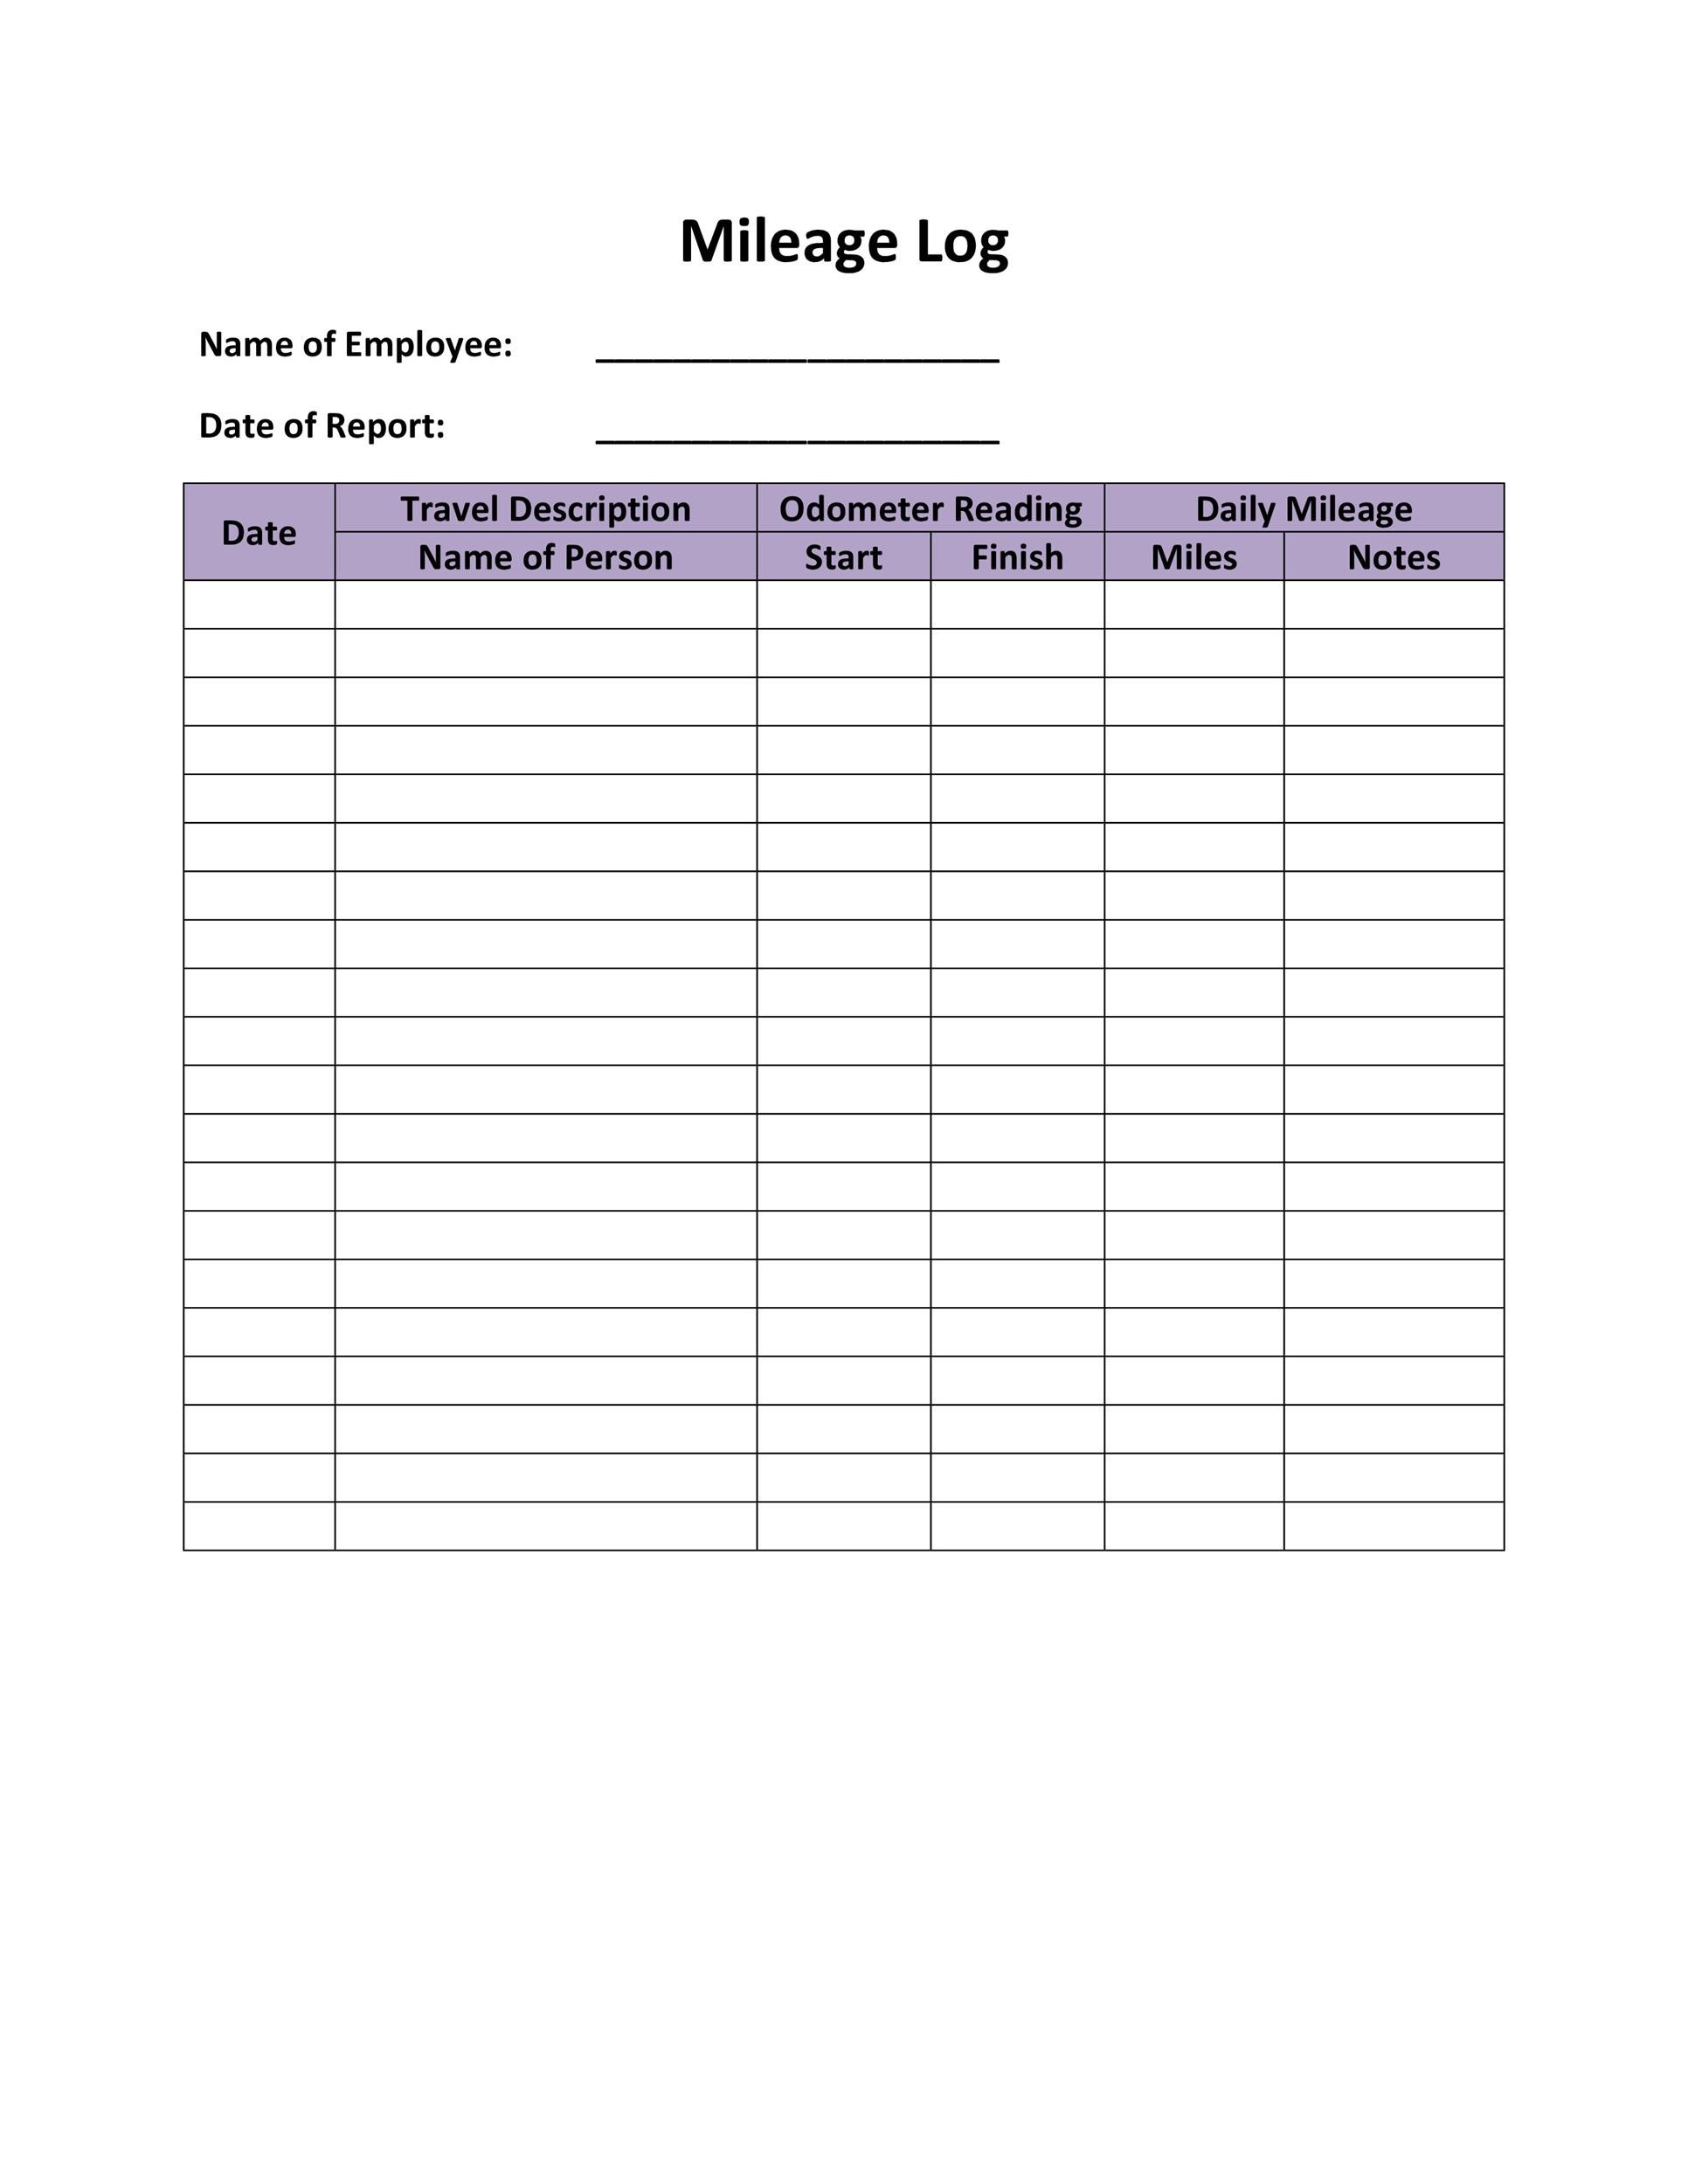 Irs Mileage Log Template Excel from templatelab.com